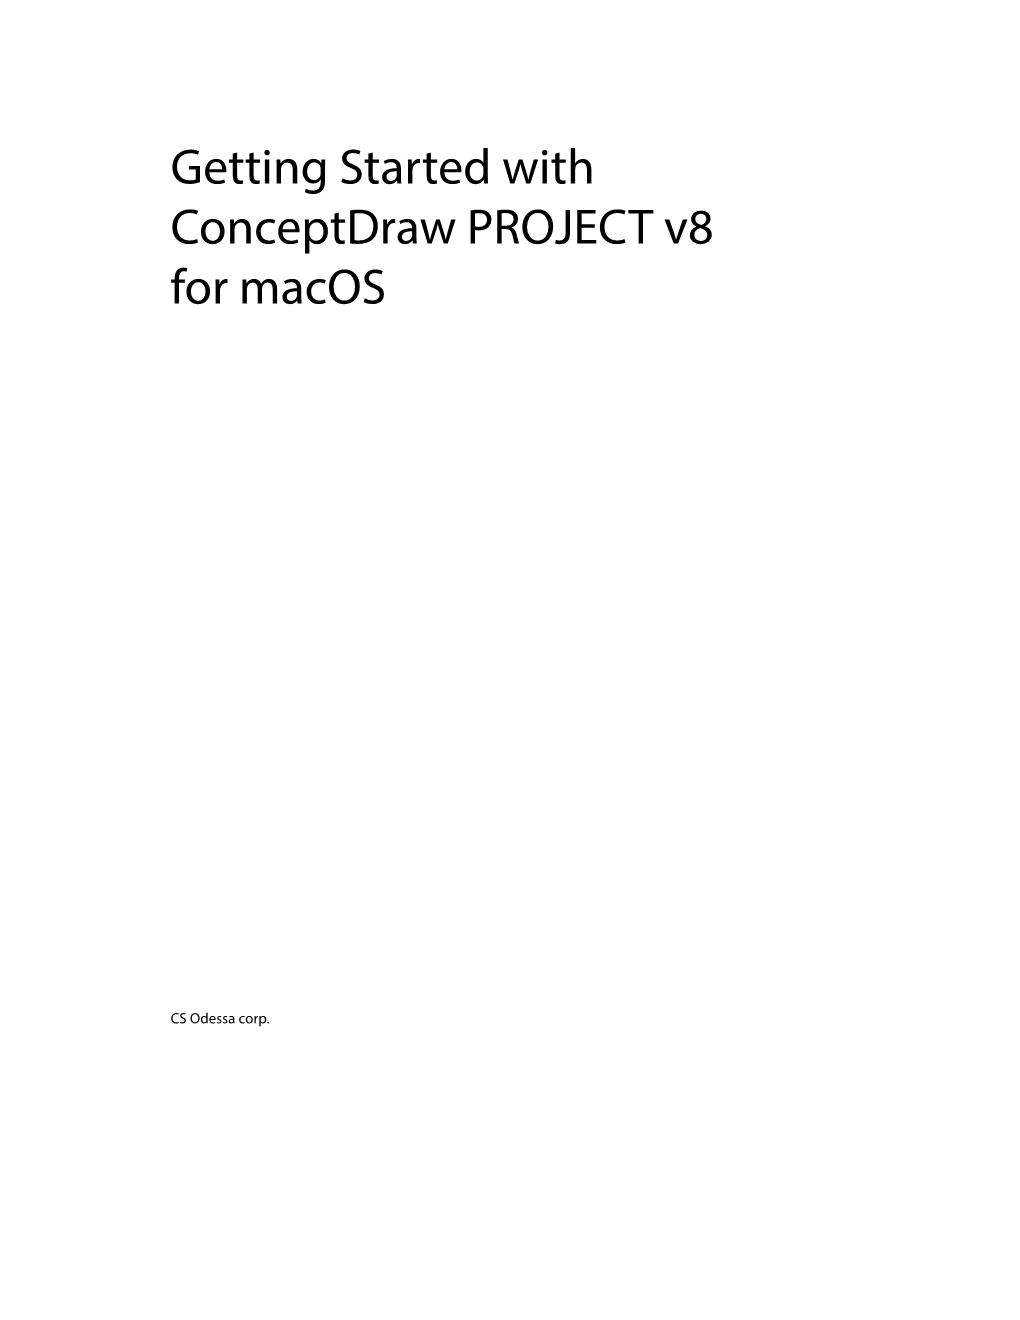 Getting Started with Conceptdraw PROJECT V8 for Macos